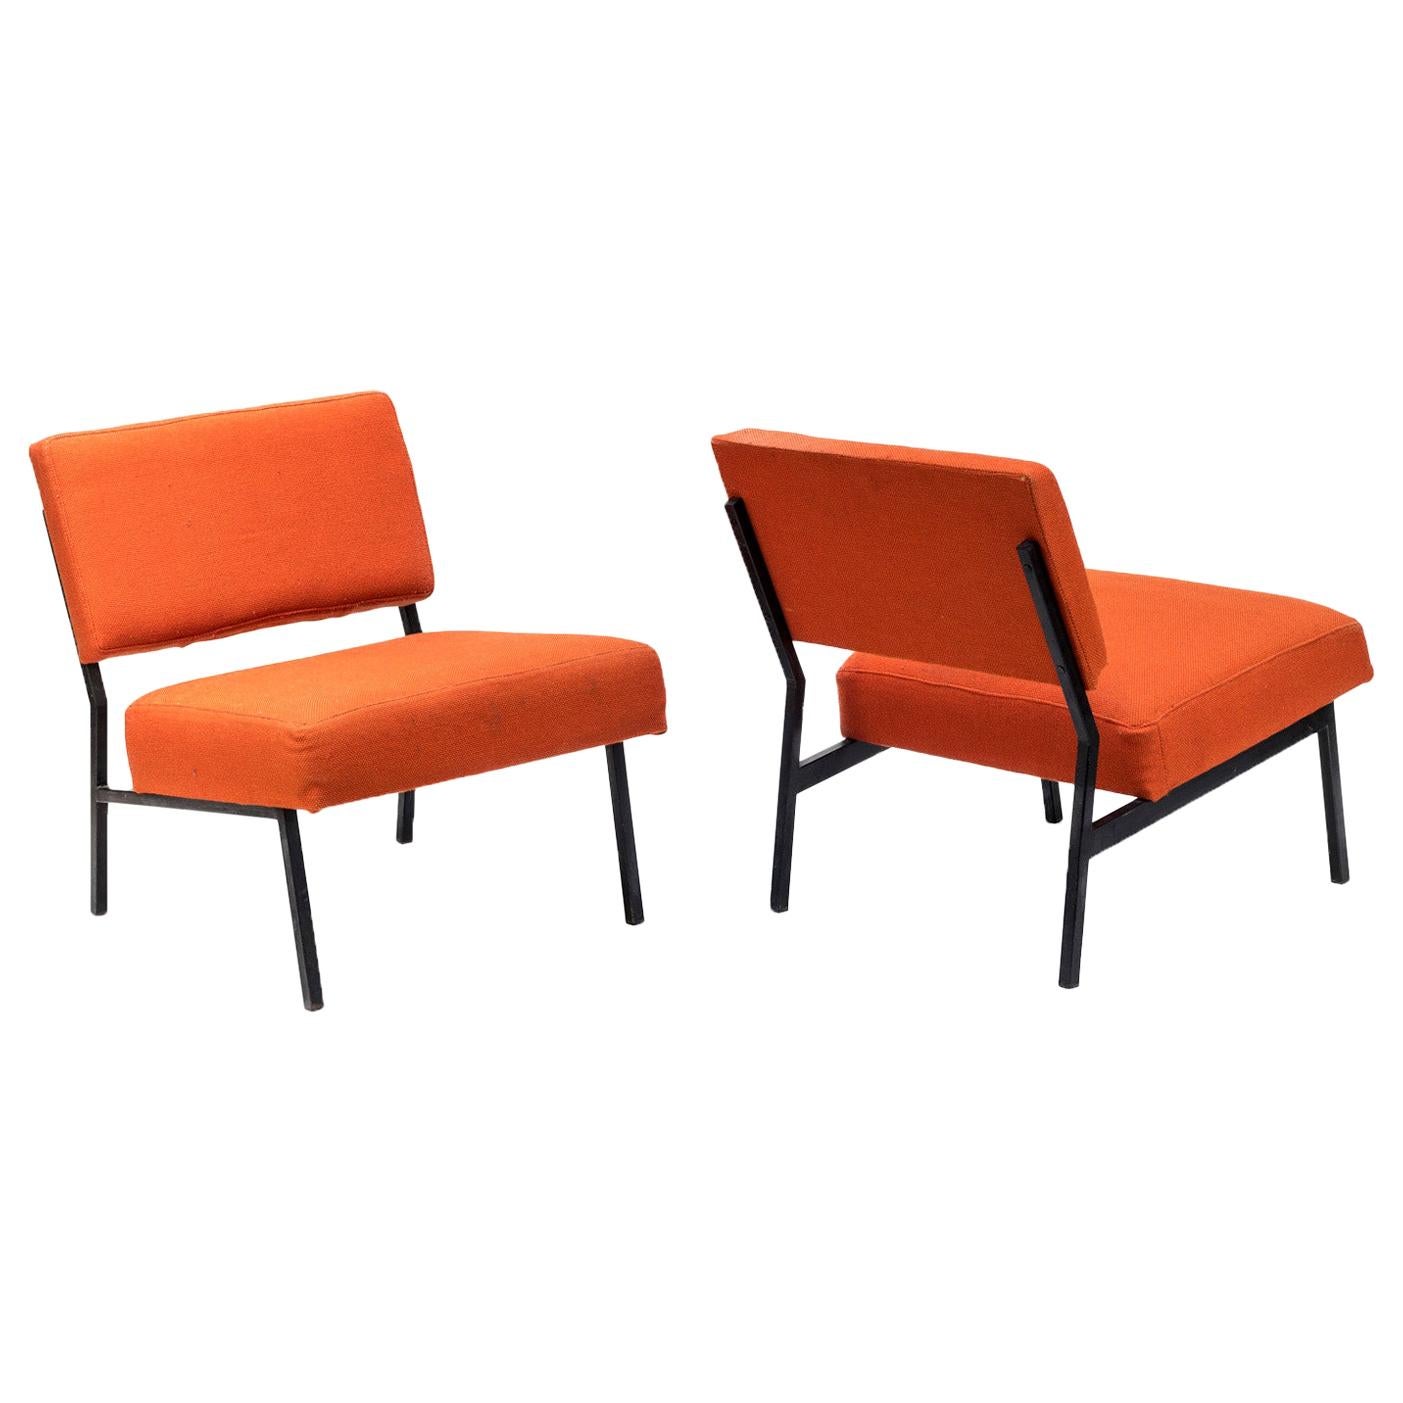 Pierre Guariche, Pair of Fireside Chairs in Black Lacquered Metal and Orange Fab